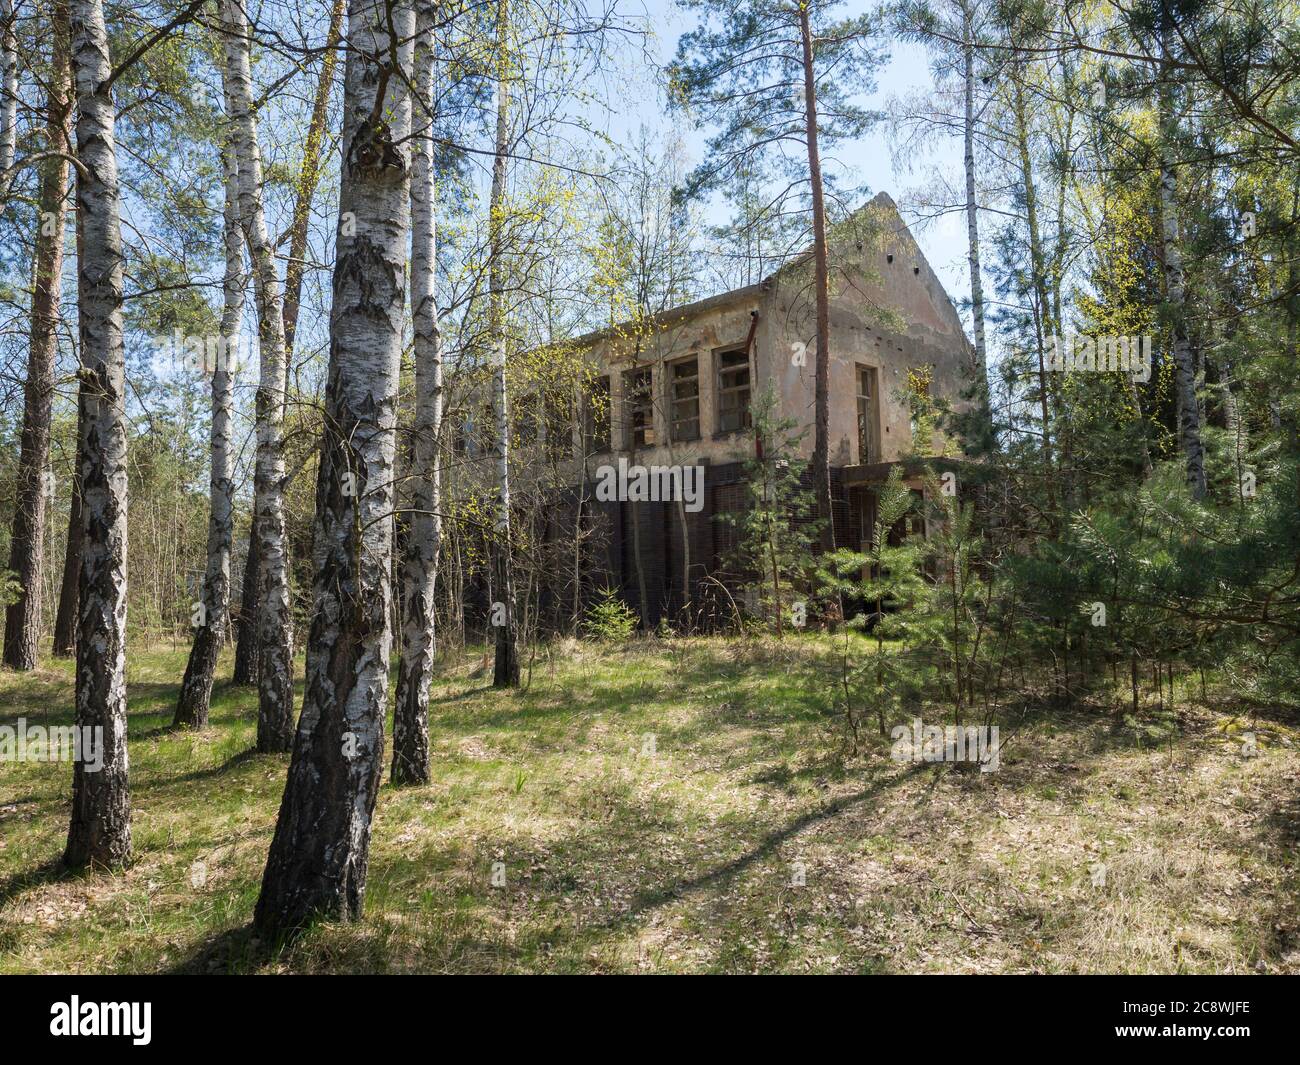 Czech Republic, Ralsko, April 26, 2019: Abandoned ruined house building at former Soviet army military training range area in the middle of woods Stock Photo